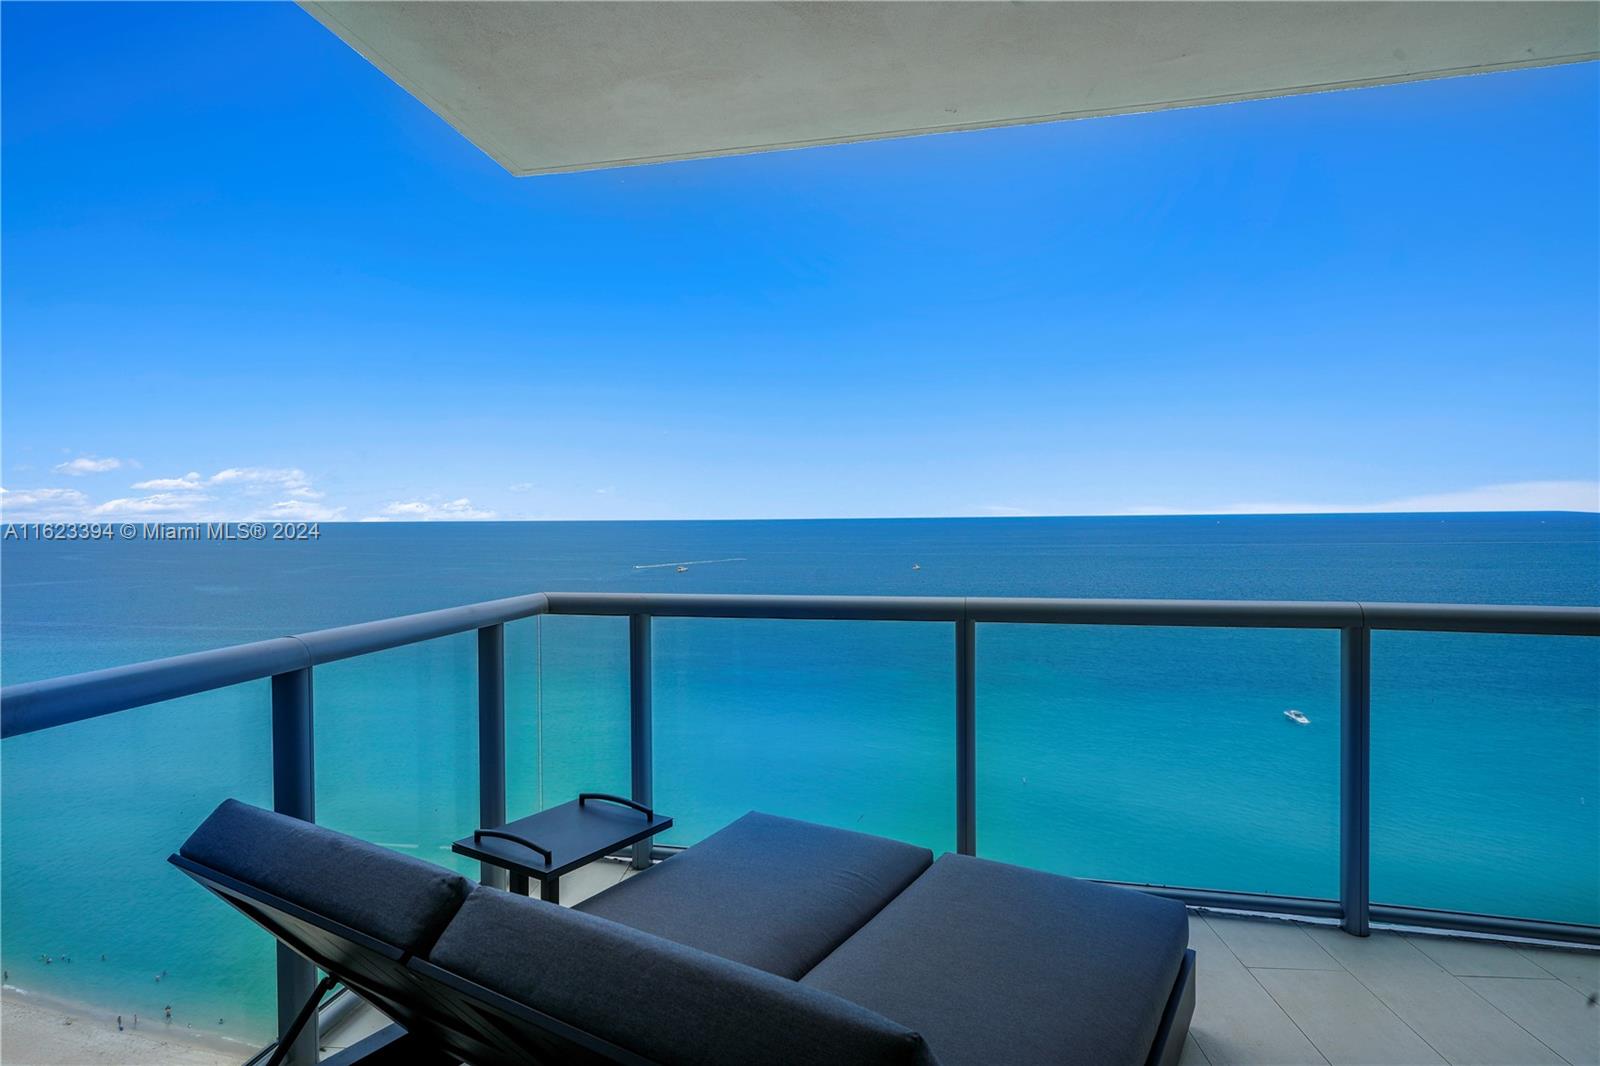 Experience luxury living at Jade Ocean in this beautiful condo with direct views throughout. 1 bedroom plus den. The thoughtful addition of a sleek alcove office makes this unit unique. This condo offers a perfect blend of style and functionality, ideal for those seeking a modern, upscale living experience with amenities including an infinity edge pool flowing through the entire building. Don't miss the opportunity to call this exceptional property your home at the prestigious Jade Ocean.
Key upgrades include: New floors, Designer Dornbracht kitchen faucet, Brand new washer and dryer, New AC unit, Fridge with a new control panel, Dishwasher equipped with a new motor, alcove office.
Jade Ocean is a luxury 52-story oceanfront tower offering 252 residences.